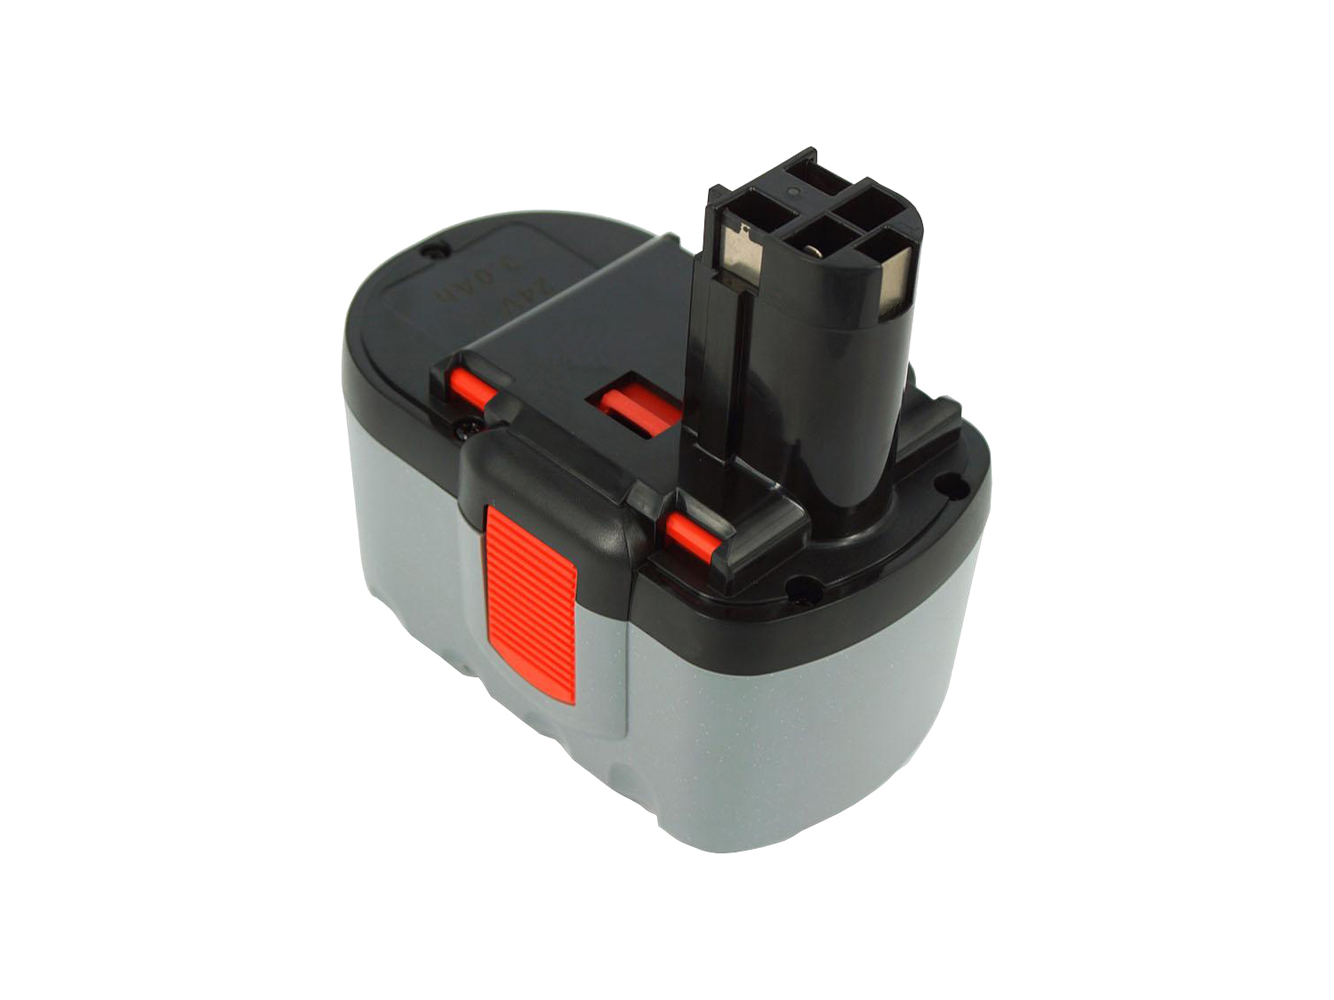 Bosch 2 607 335 446, 2 607 335 448 Power Tool Battery For 11524, 12524 replacement